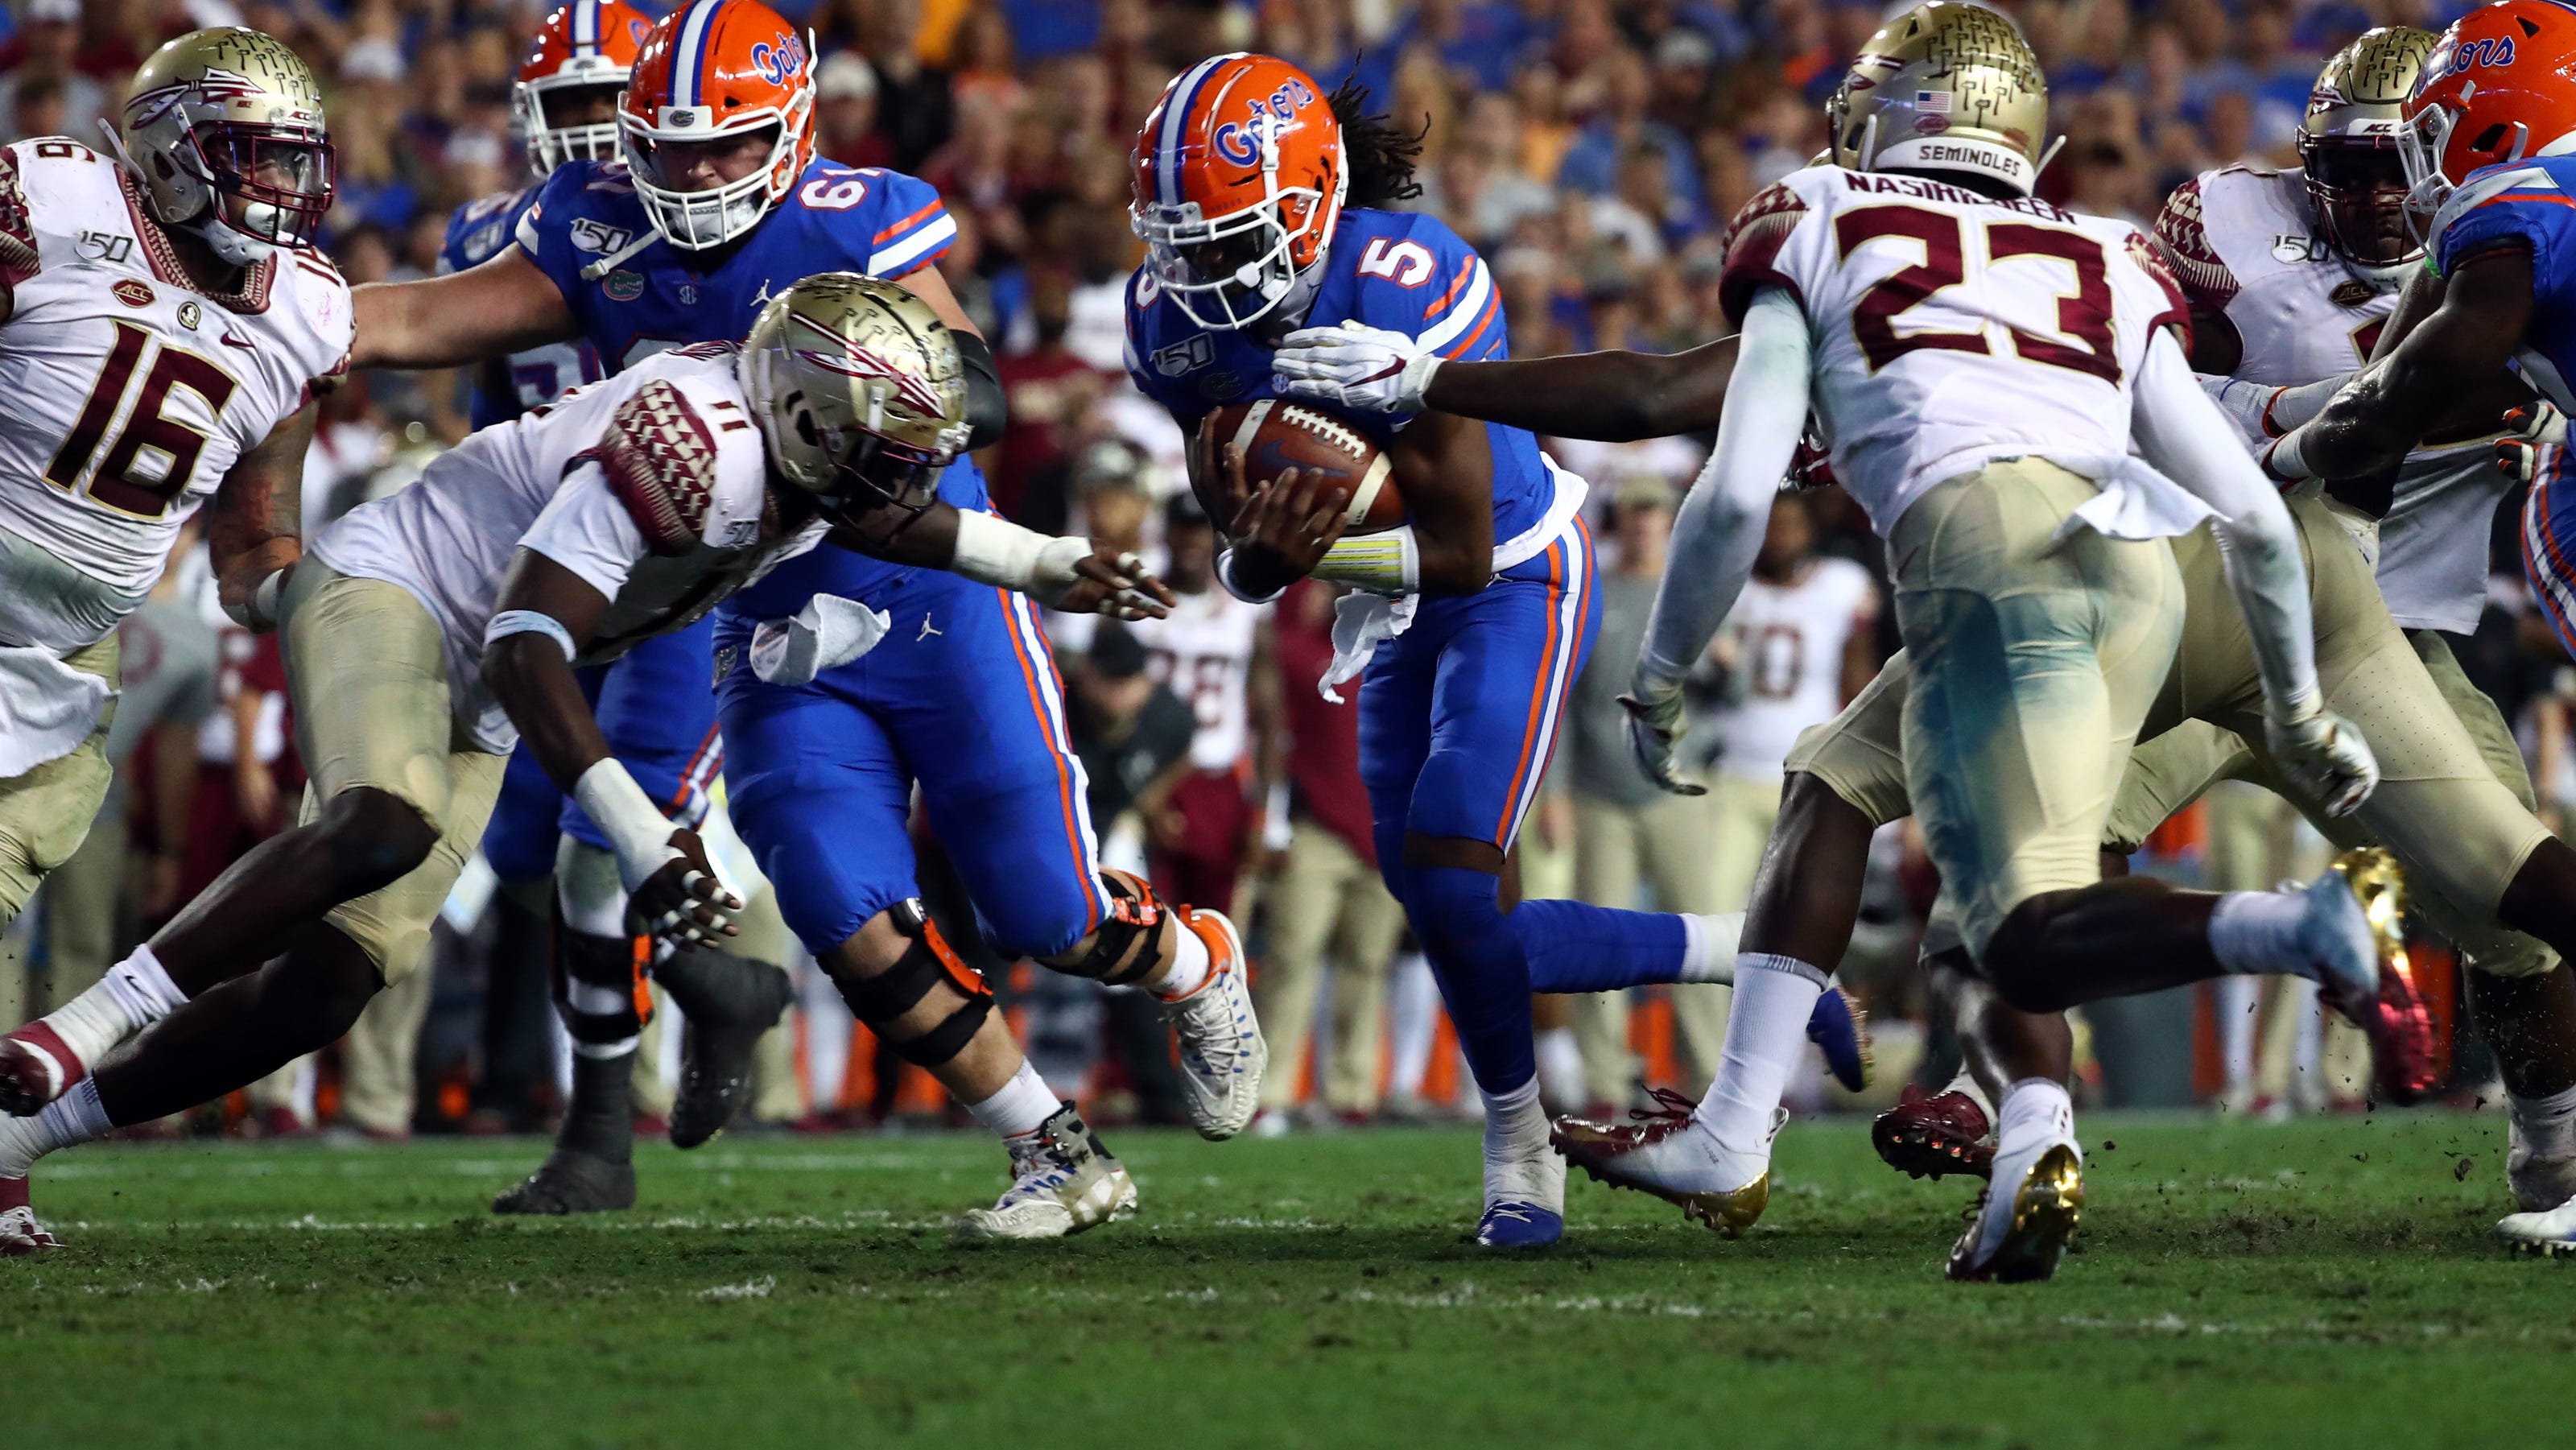 FloridaFSU game a casualty of SEC’s decision for only 10league games